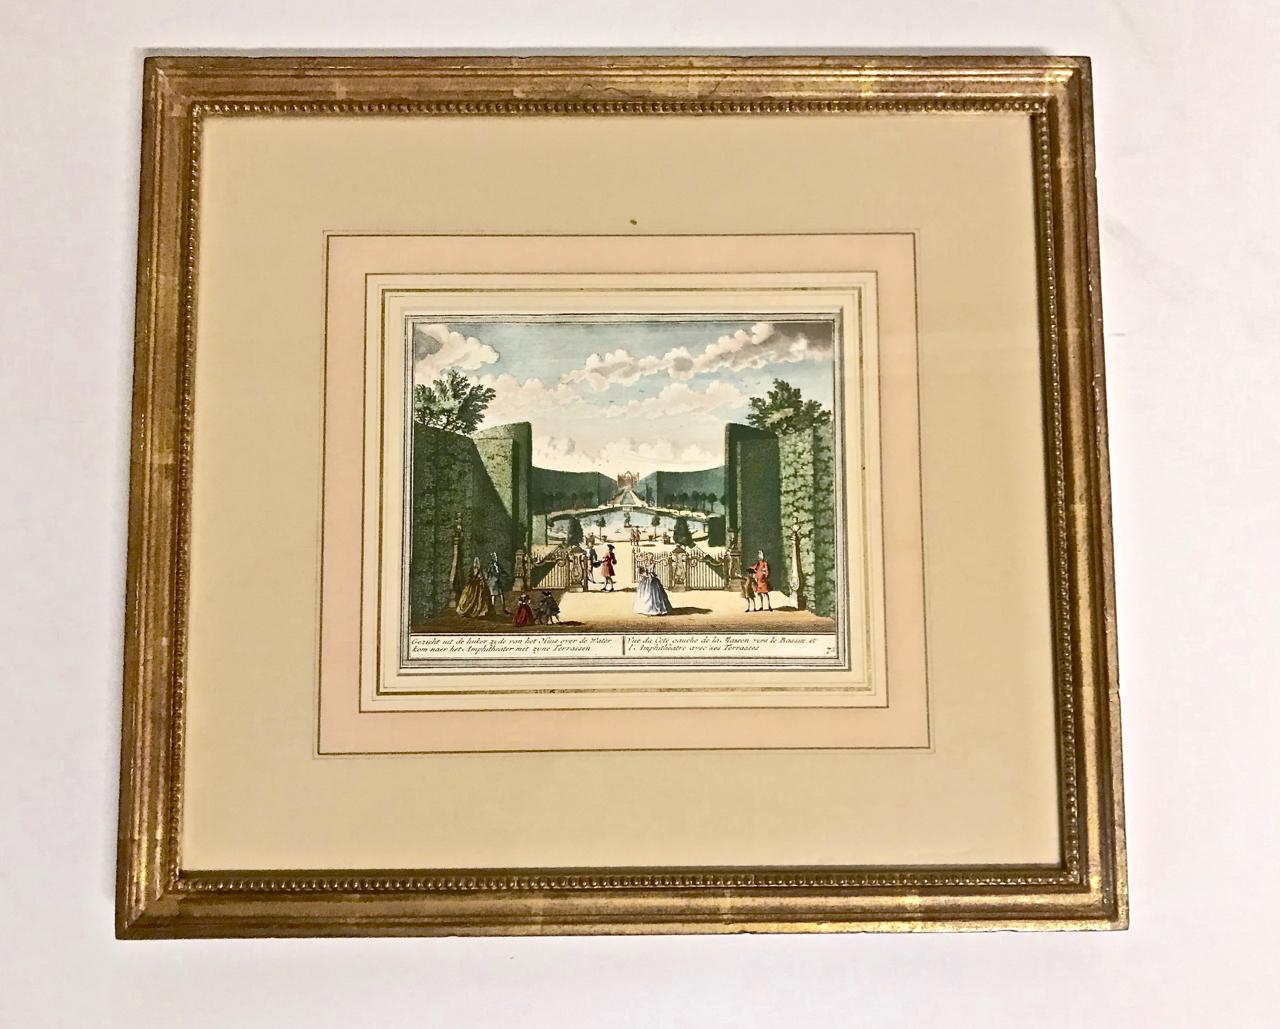 Charming set of four 18th century engravings of Dutch gardens and castles by Nidek Mattaeus Brouerius and Henrik de Leth. All four folios are in good condition and are beautifully framed in a beaded gold leaf frame and hand-colored French mats.
 